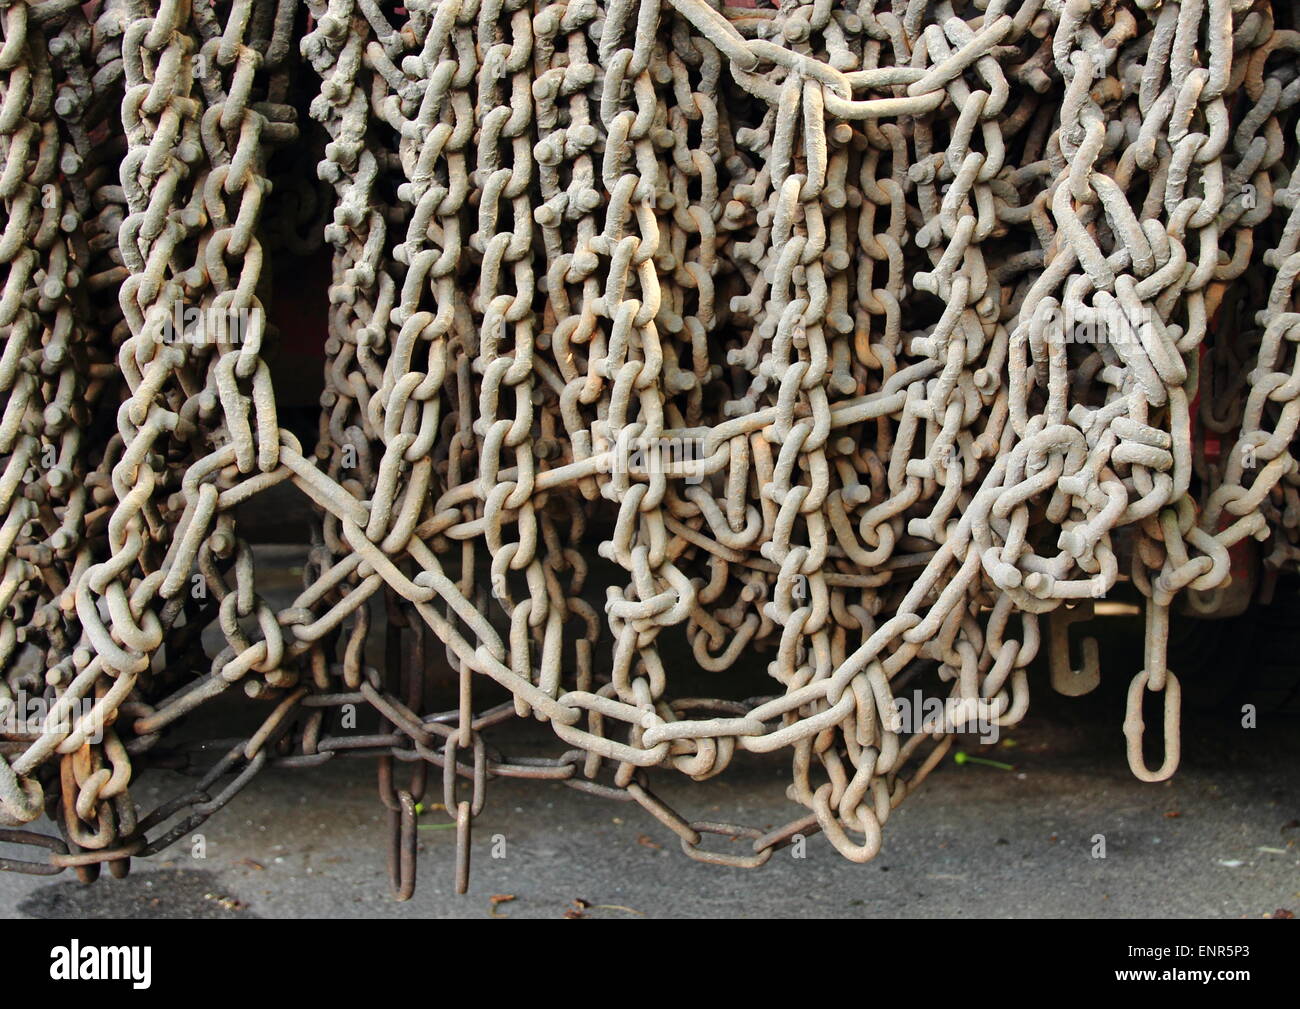 Hanging Chains Photos and Images